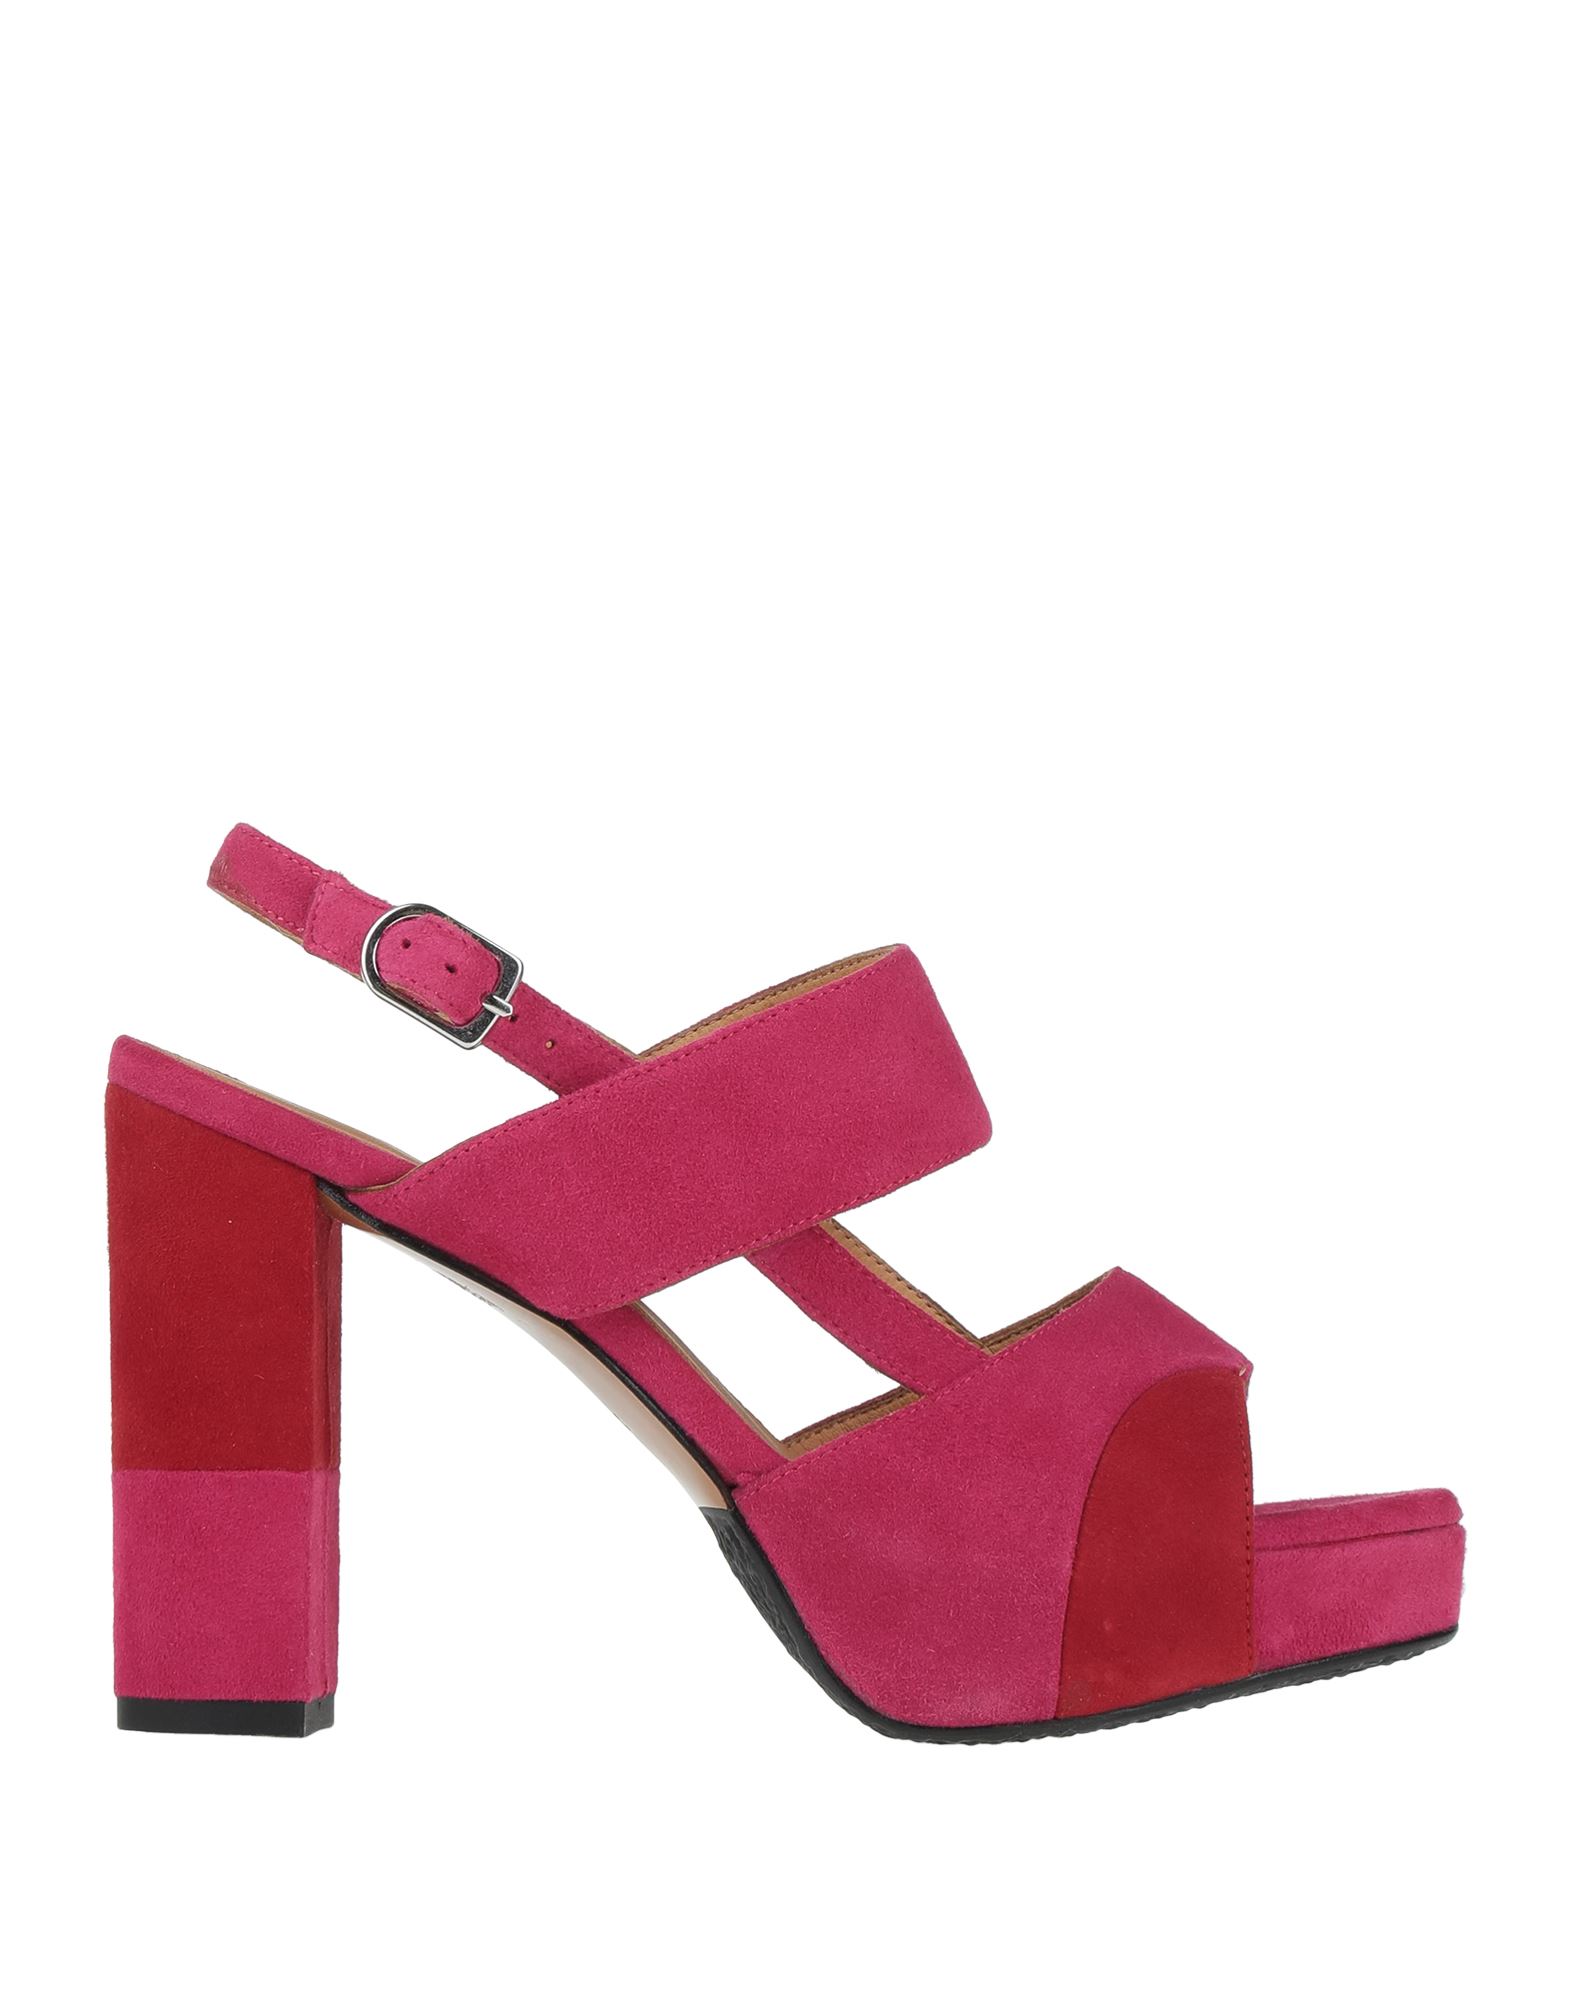 Audley Sandals In Fuchsia